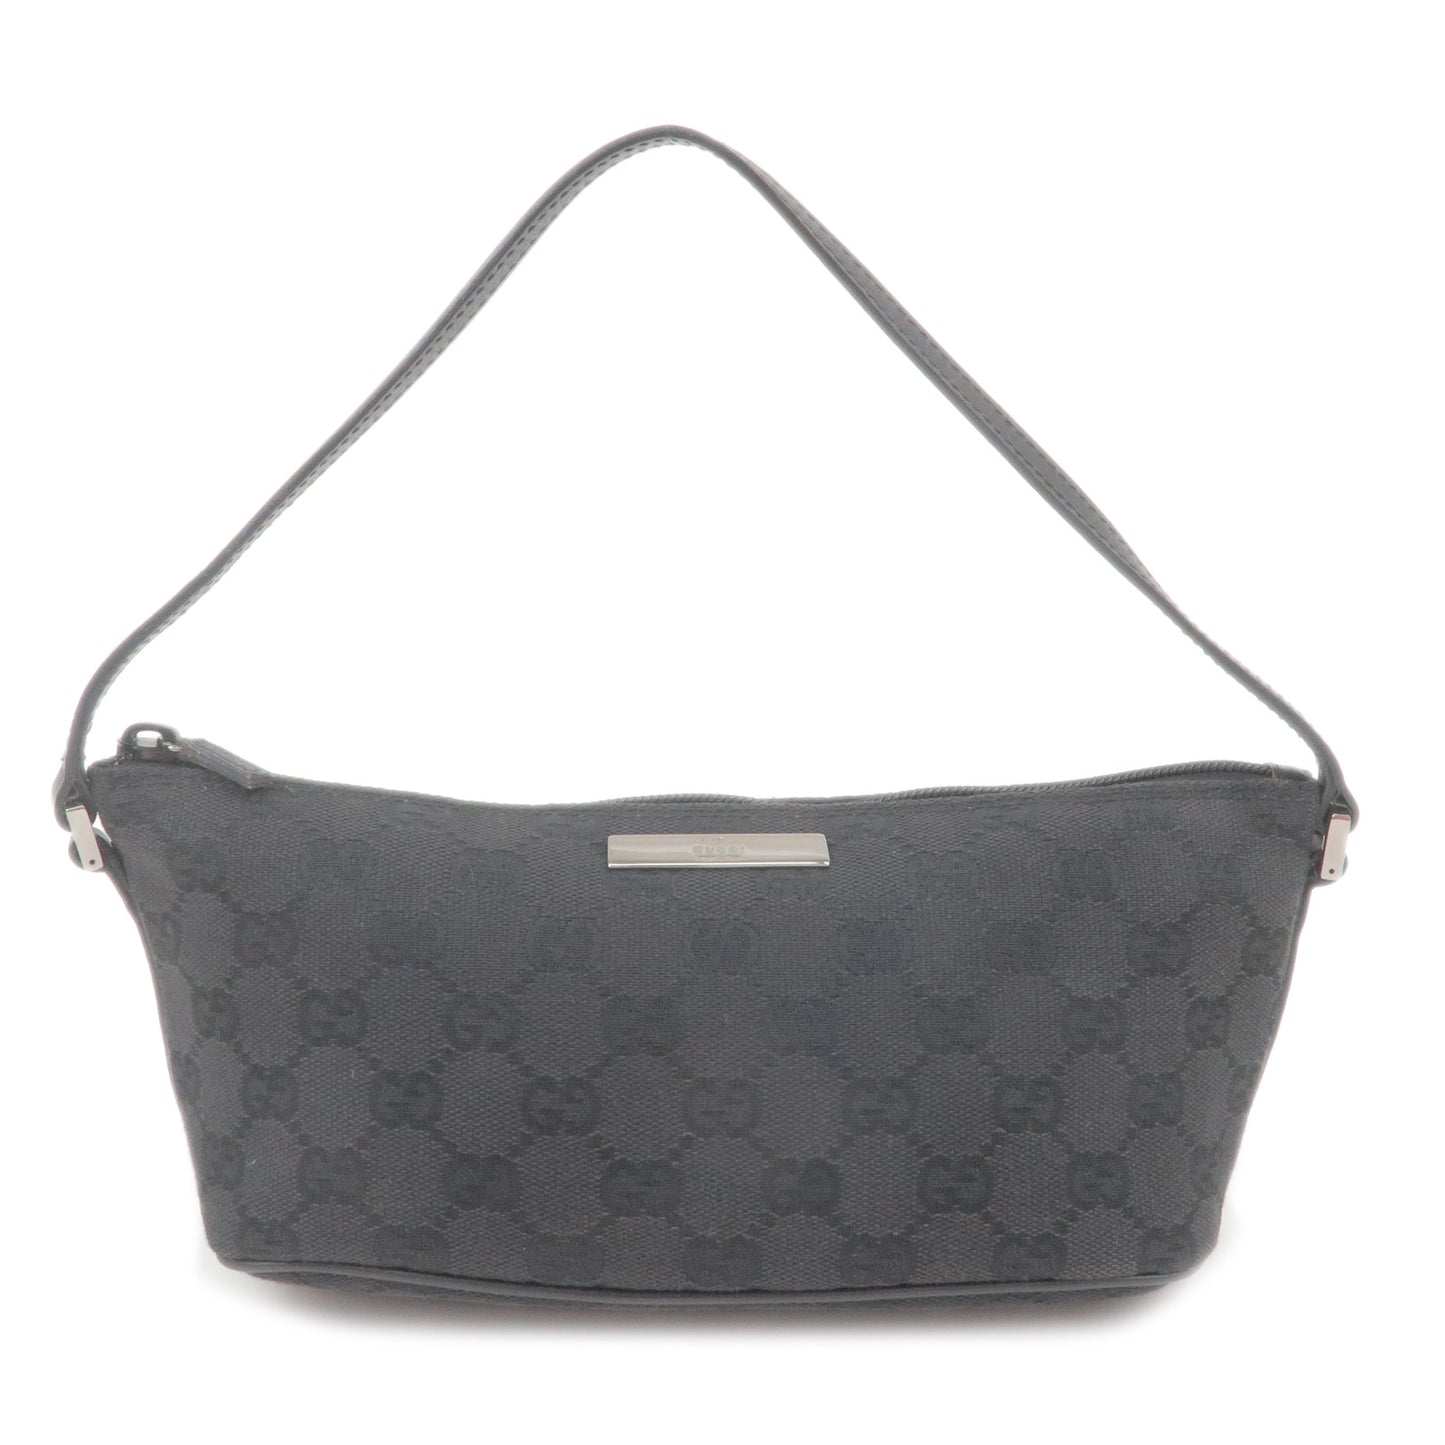 GUCCI-GG-Canvas-Leather-Boat-Bag-Hand-Bag-Black-07198